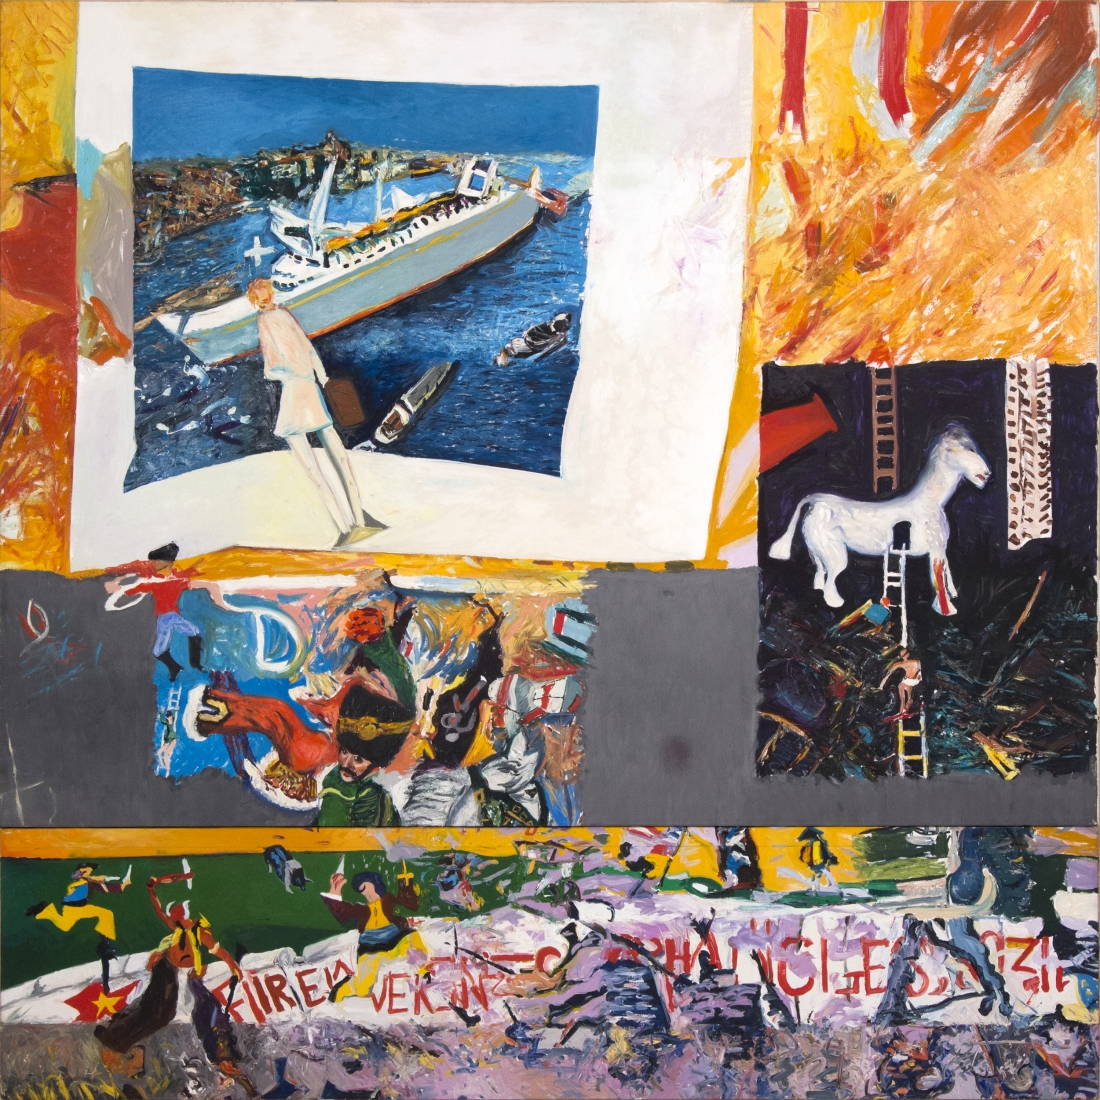 Malcolm&nbsp;Morley
Day of the Locust III, 1979
oil on canvas
48 x 48 inches (122 x 122 cm)
SW 17029
&nbsp;